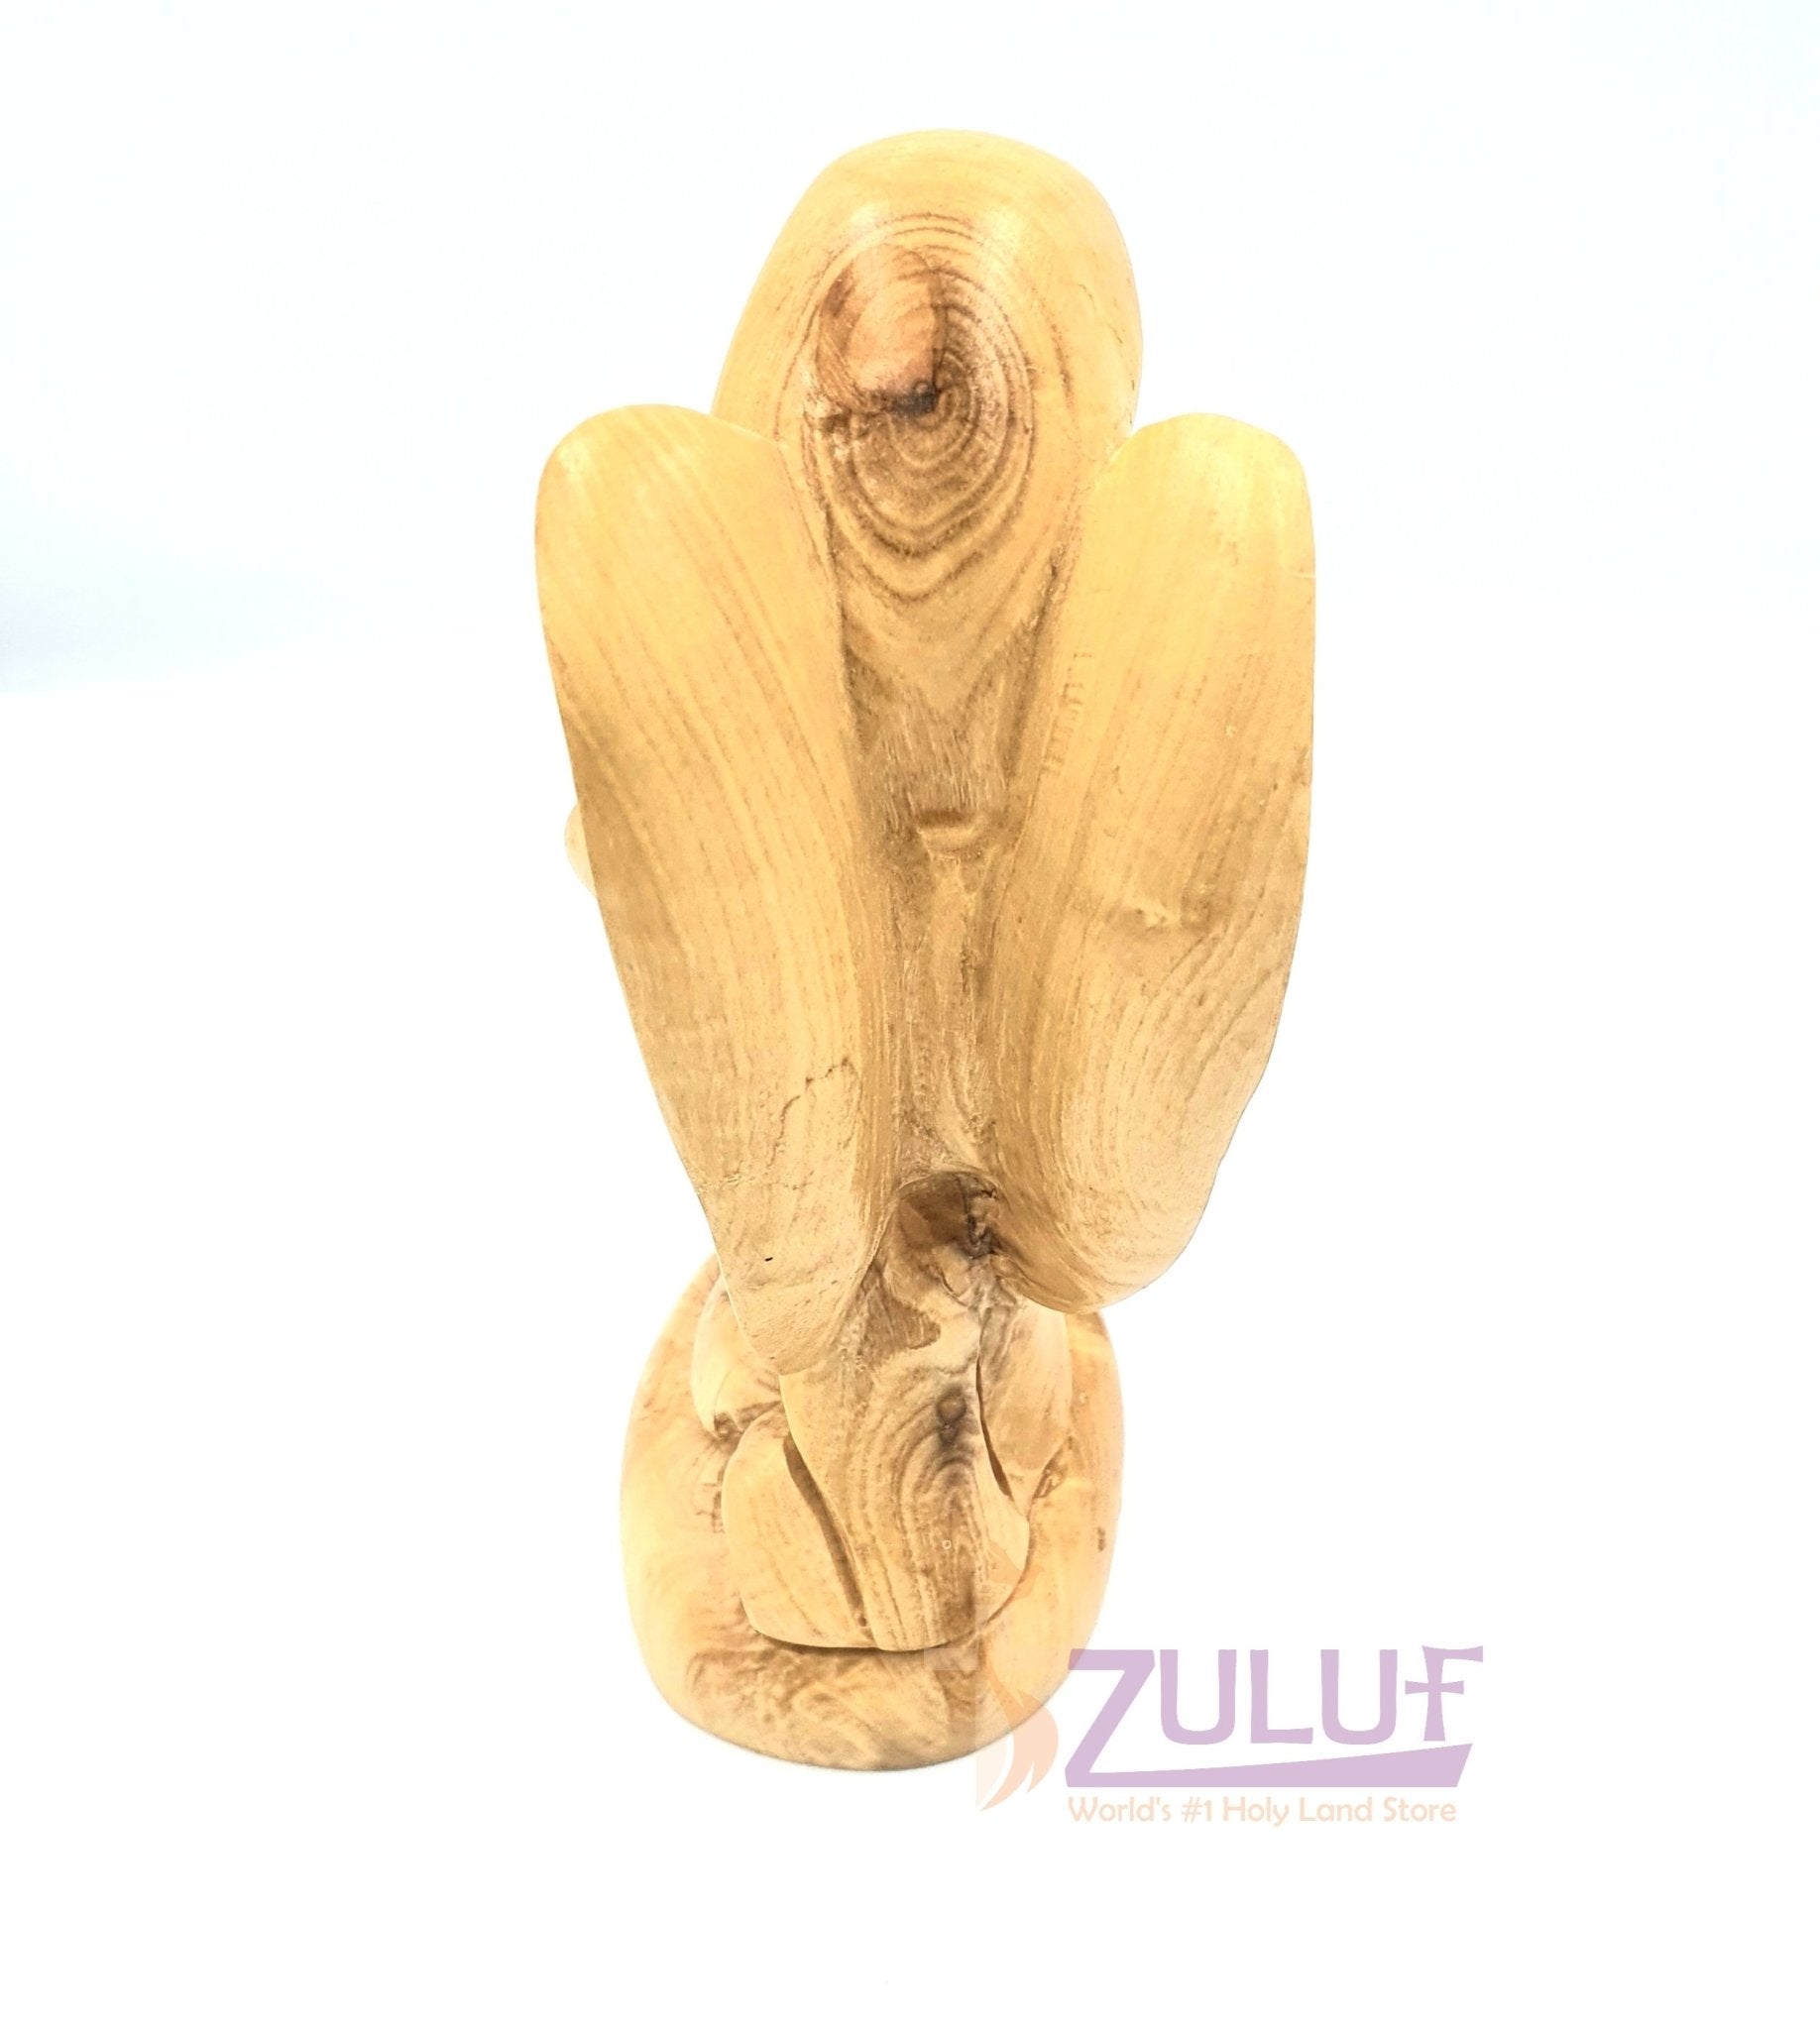 Zuluf Wooden Angel Religious Gift Store Angels Guardian ANG005 - Zuluf